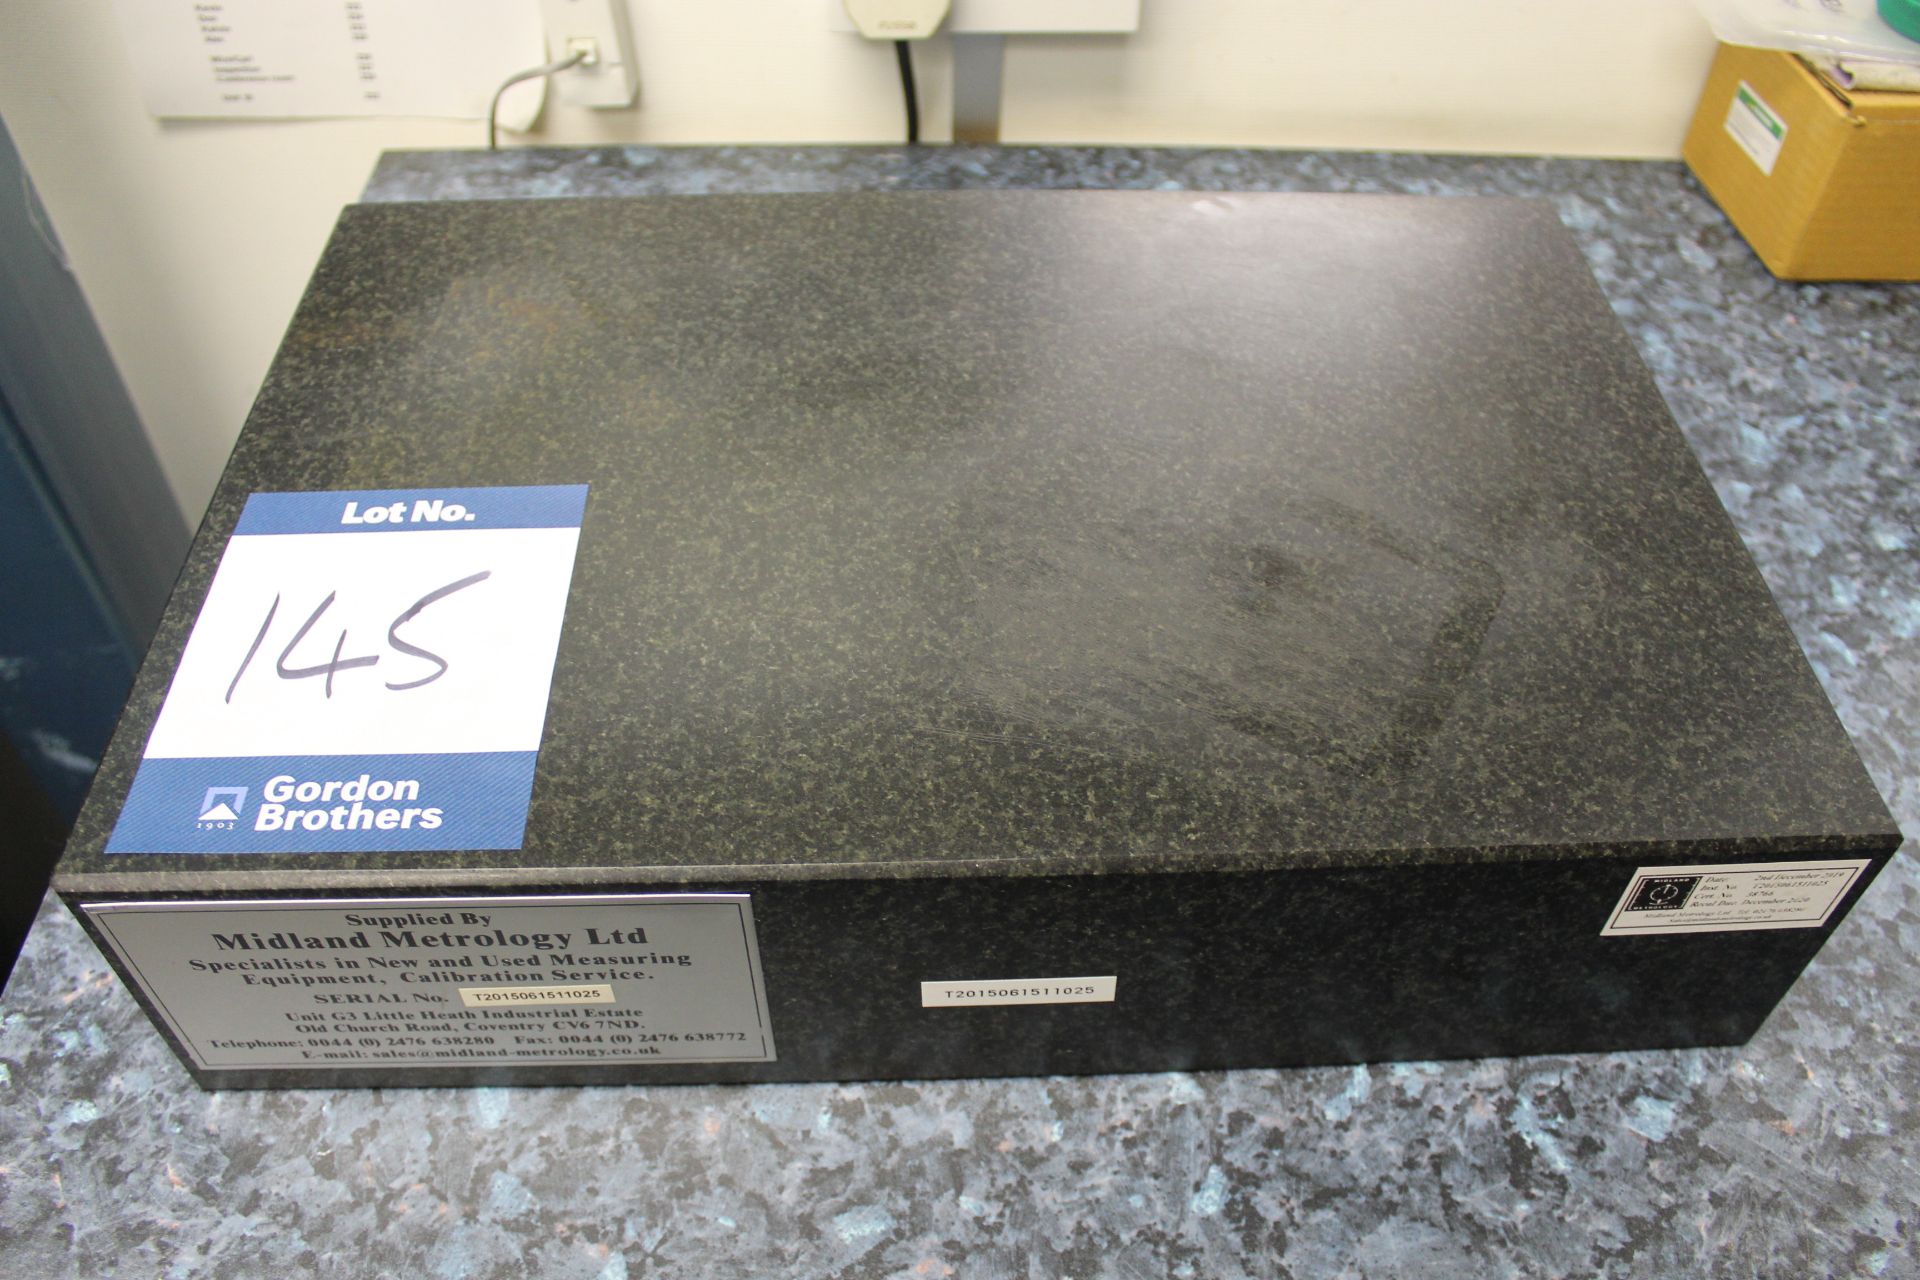 Midland Metrology bench mounted granite surface plate, Serial No. T2015061511025, size: 450mm x